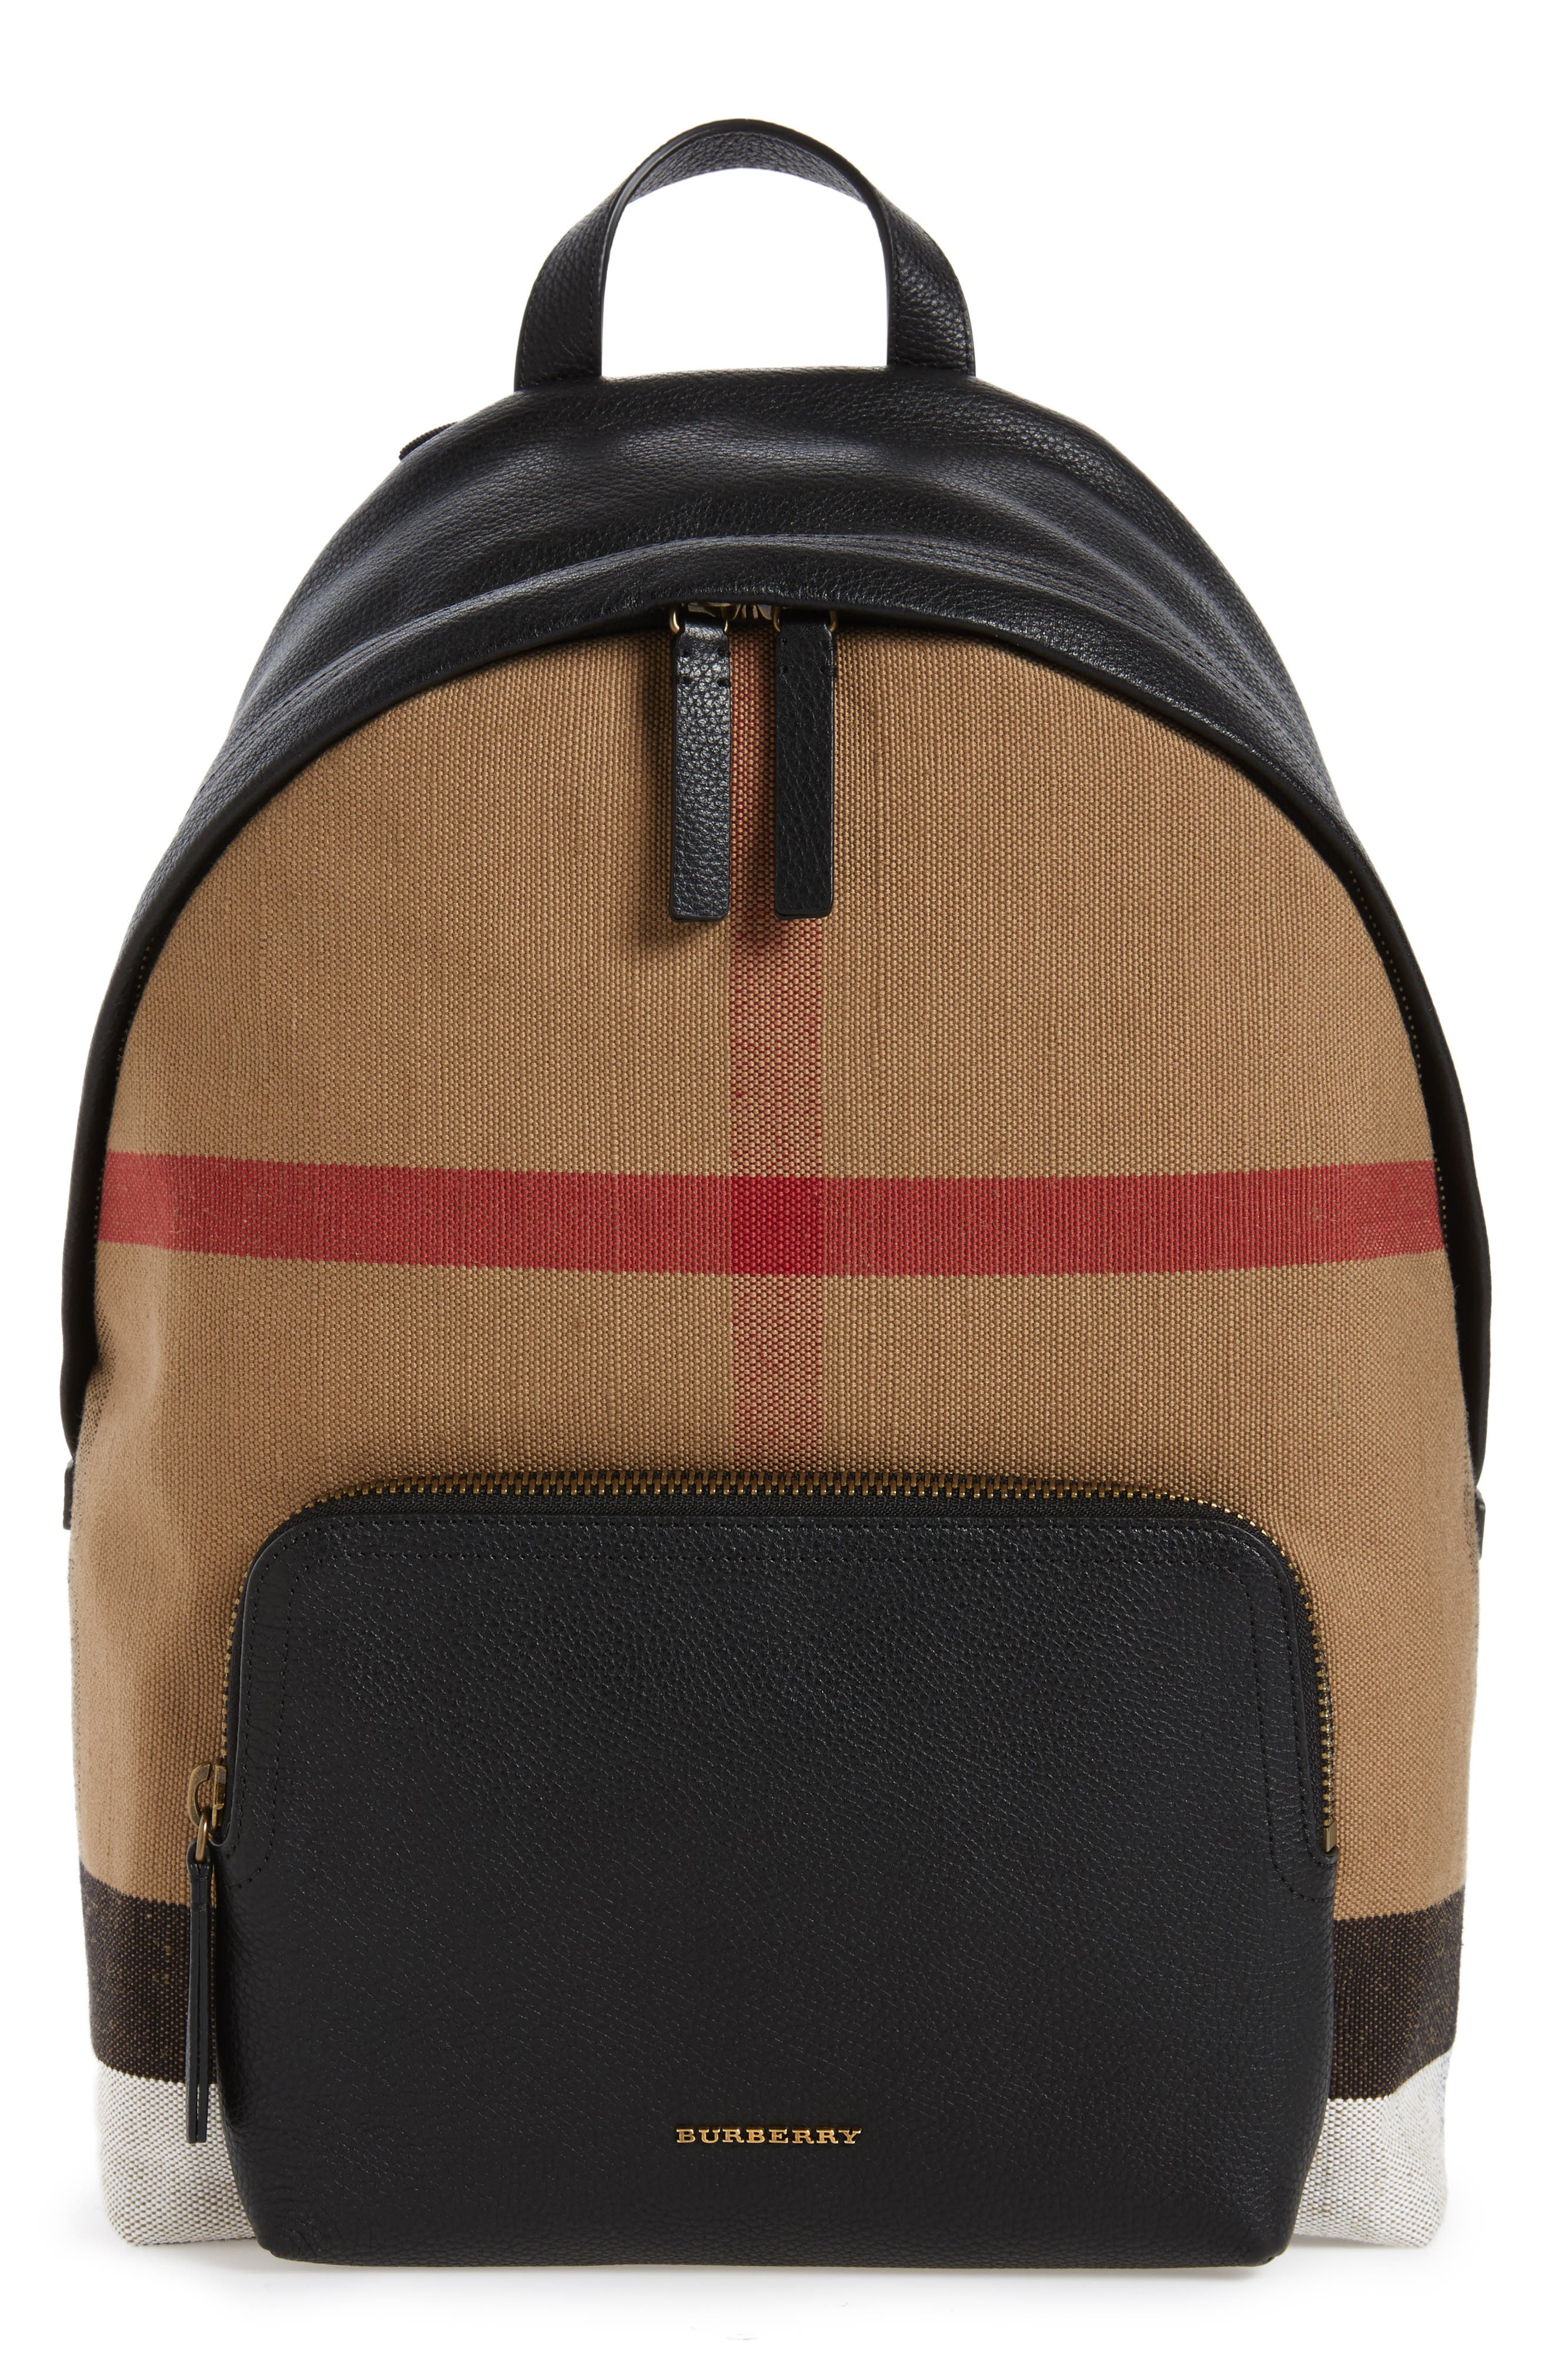 burberry abbeydale backpack